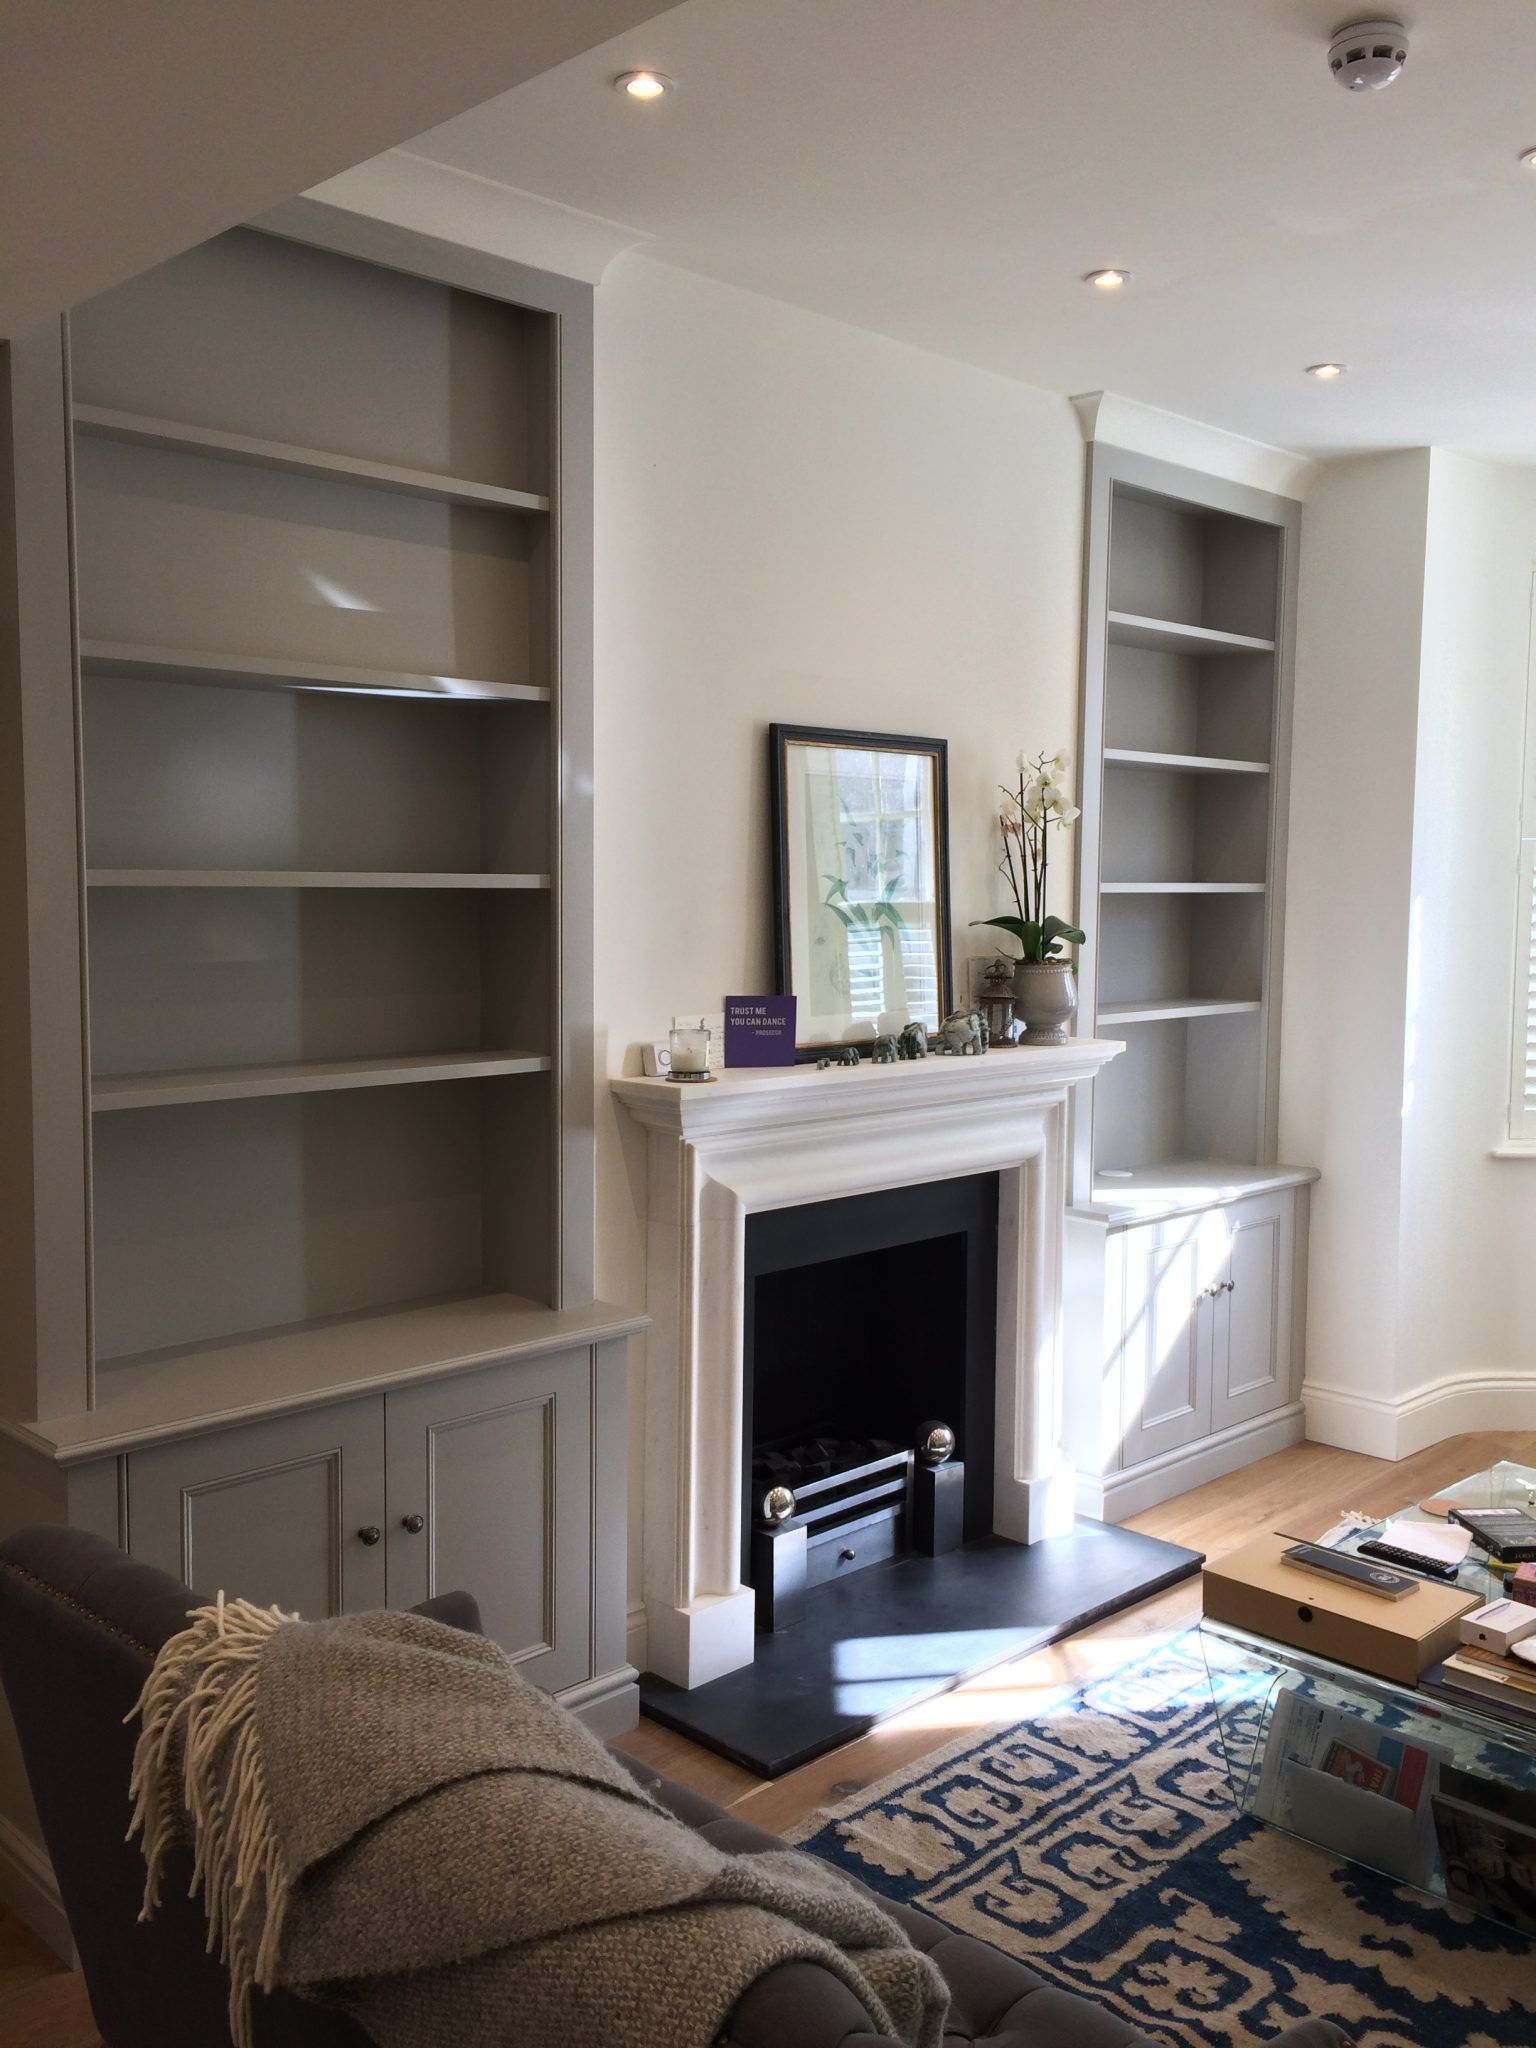 Things to know about bookcases
around  fireplace design